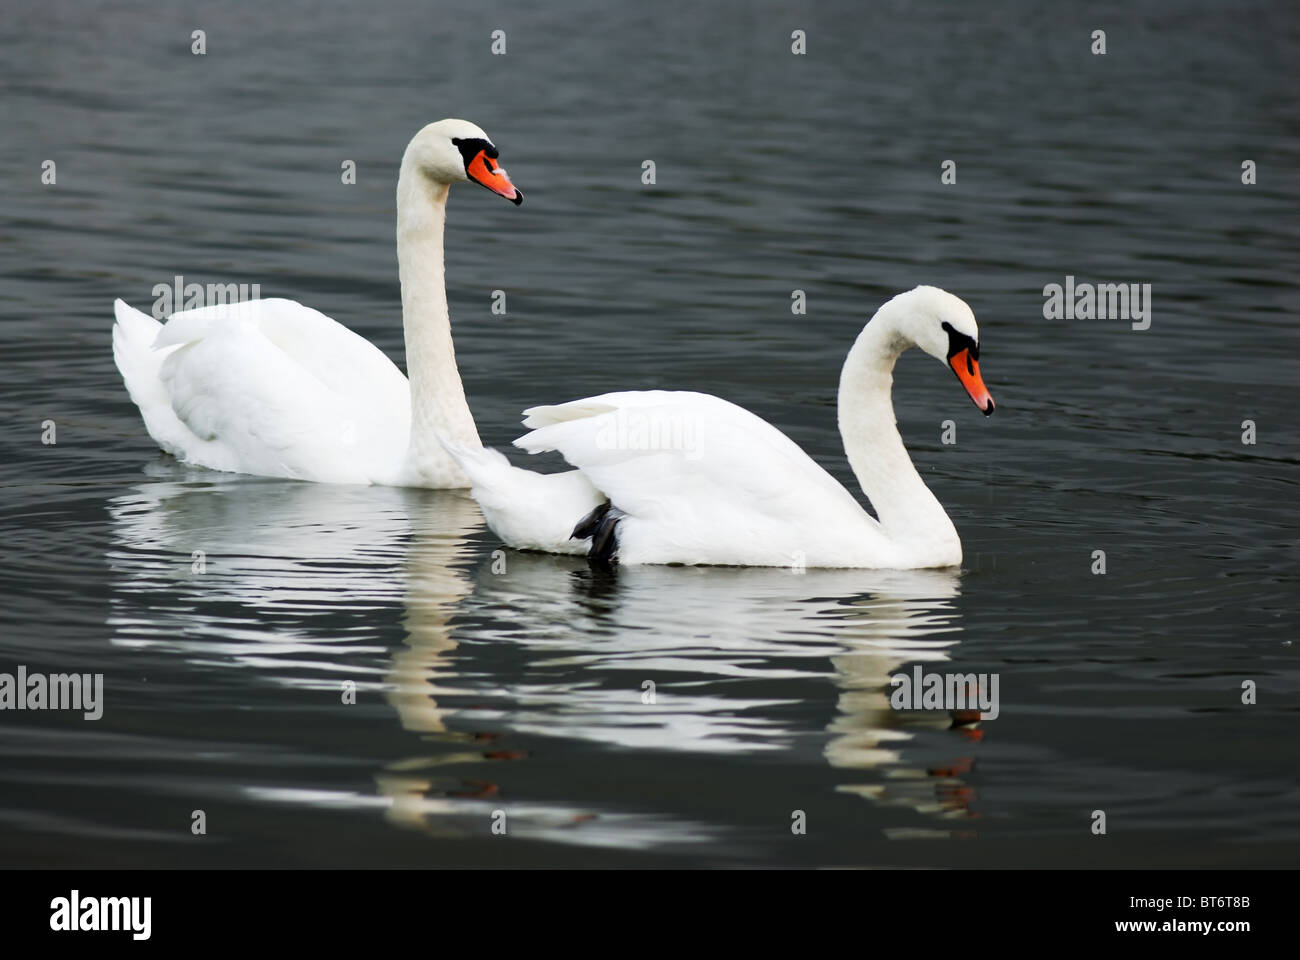 Two swans Stock Photo